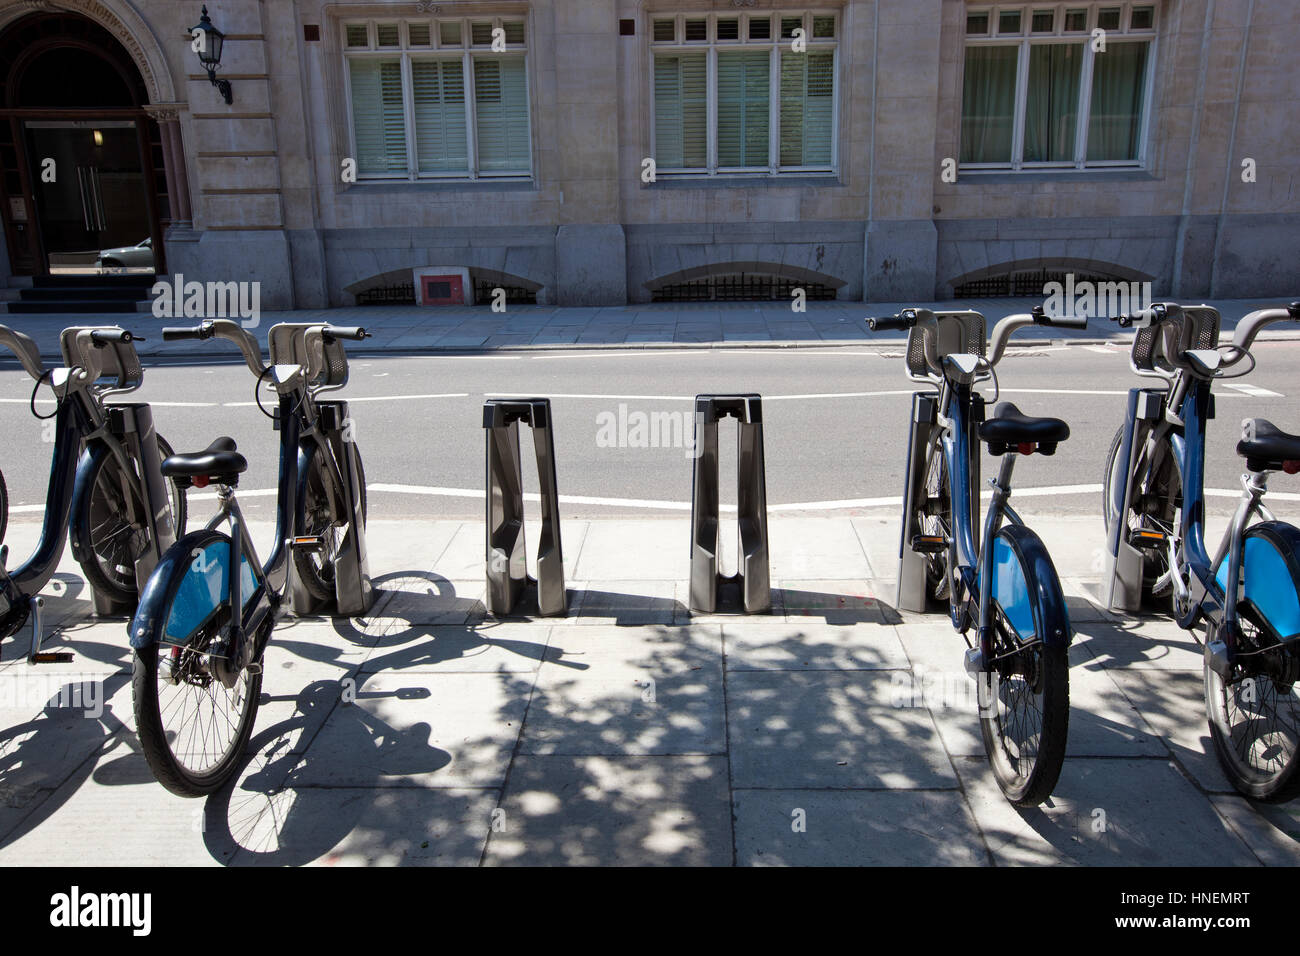 Public Rental Bicycles in a Line, London, UK Stock Photo